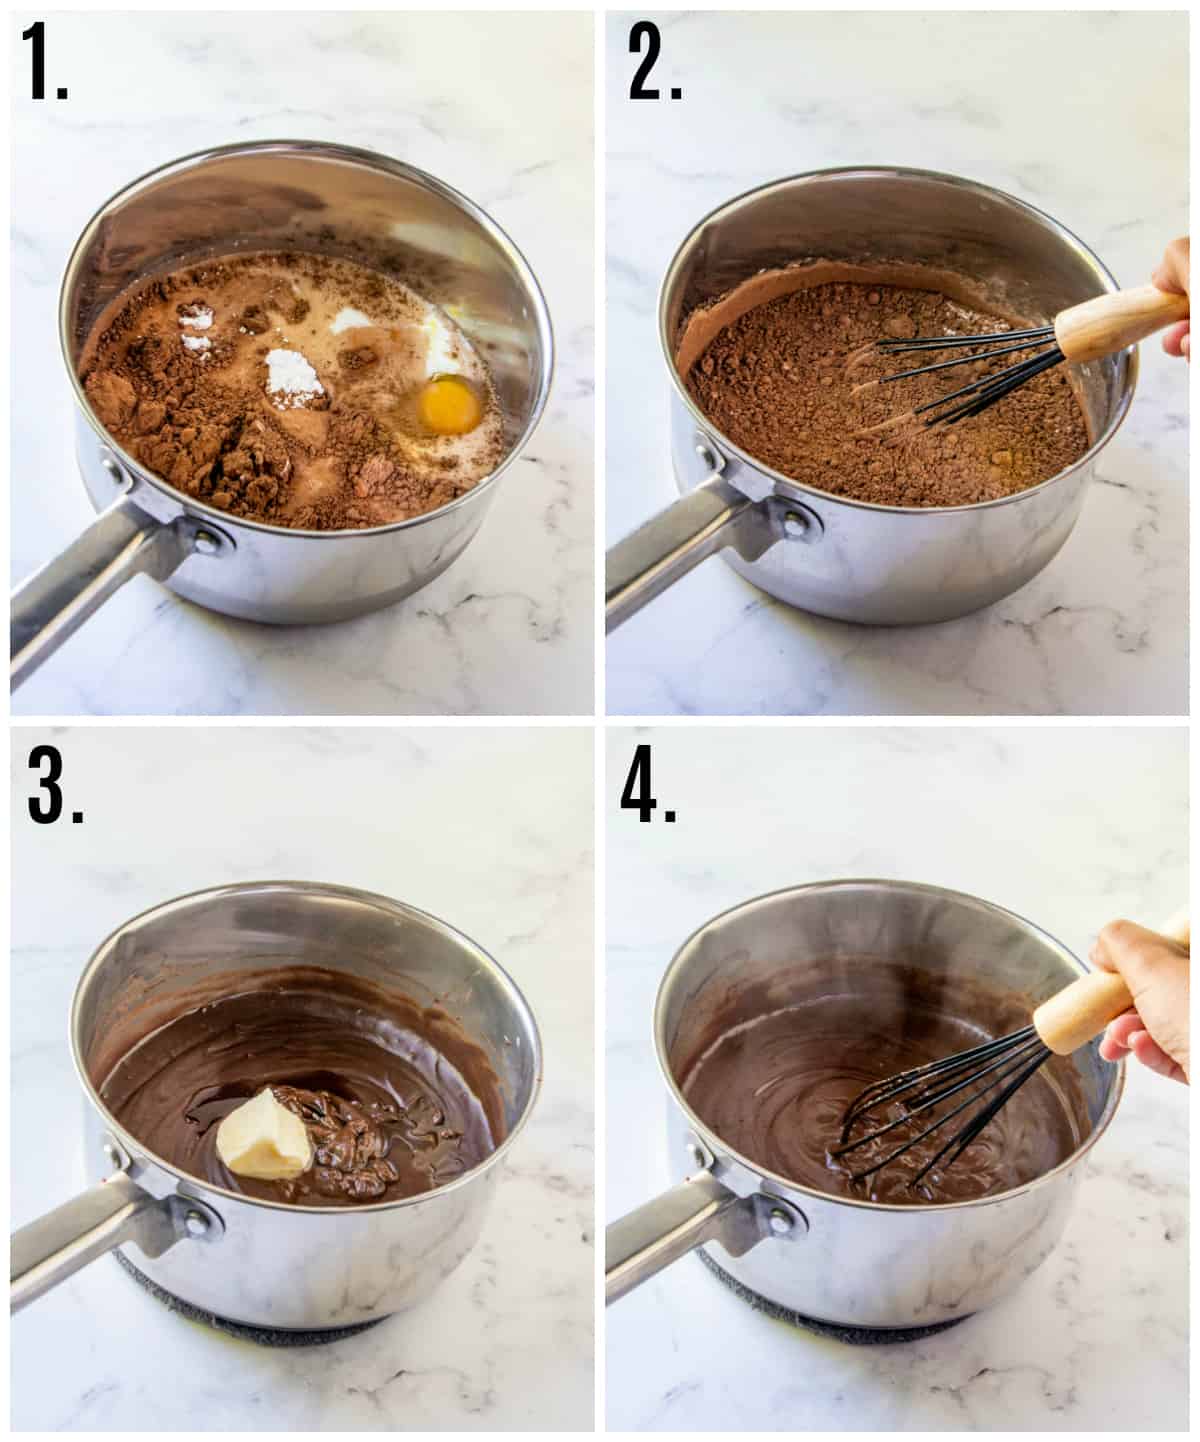 Step by step photos on how to make Homemade Chocolate Pudding